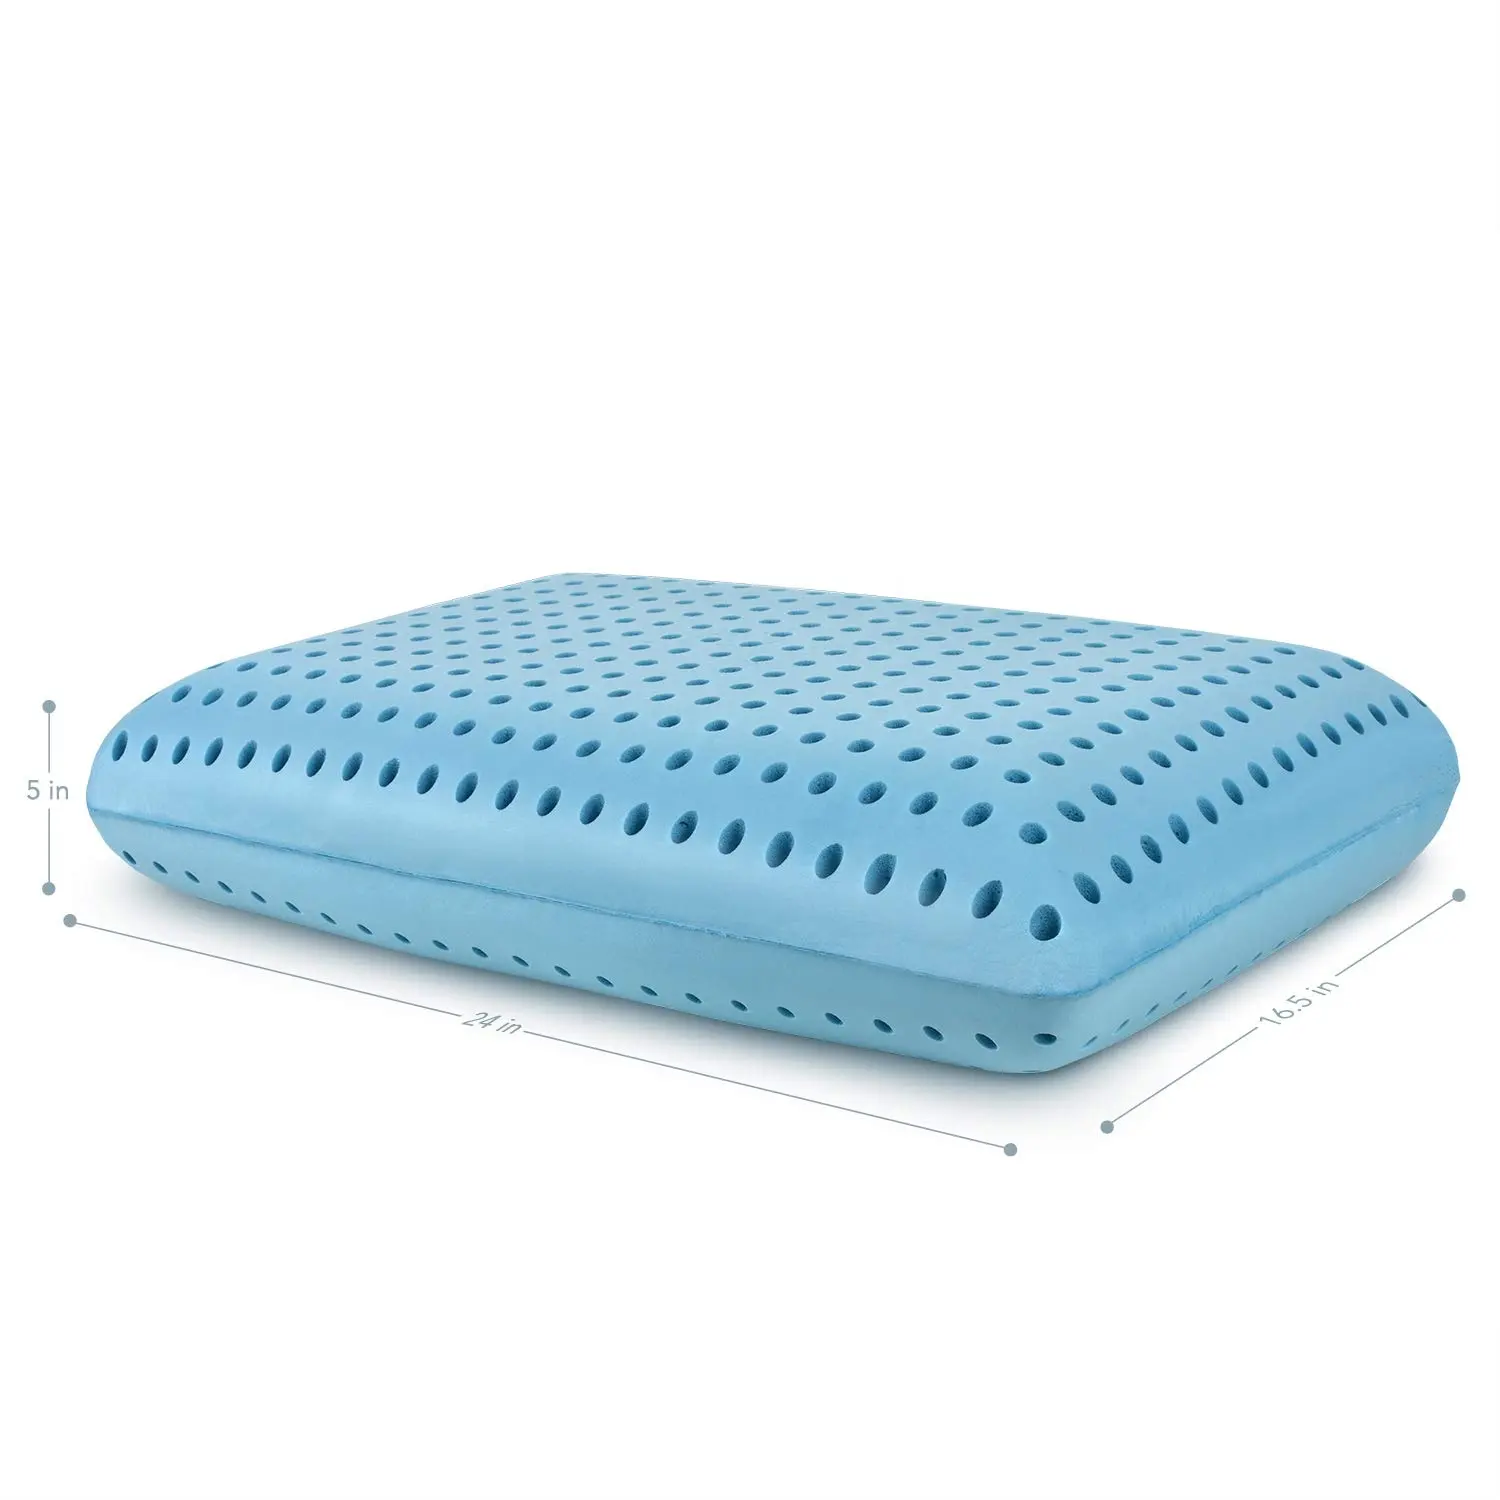 Blue Cooling Gel Infused Memory Foam Ventilated Hole-Punch Bed Pillow Removable Machine Washable Cover